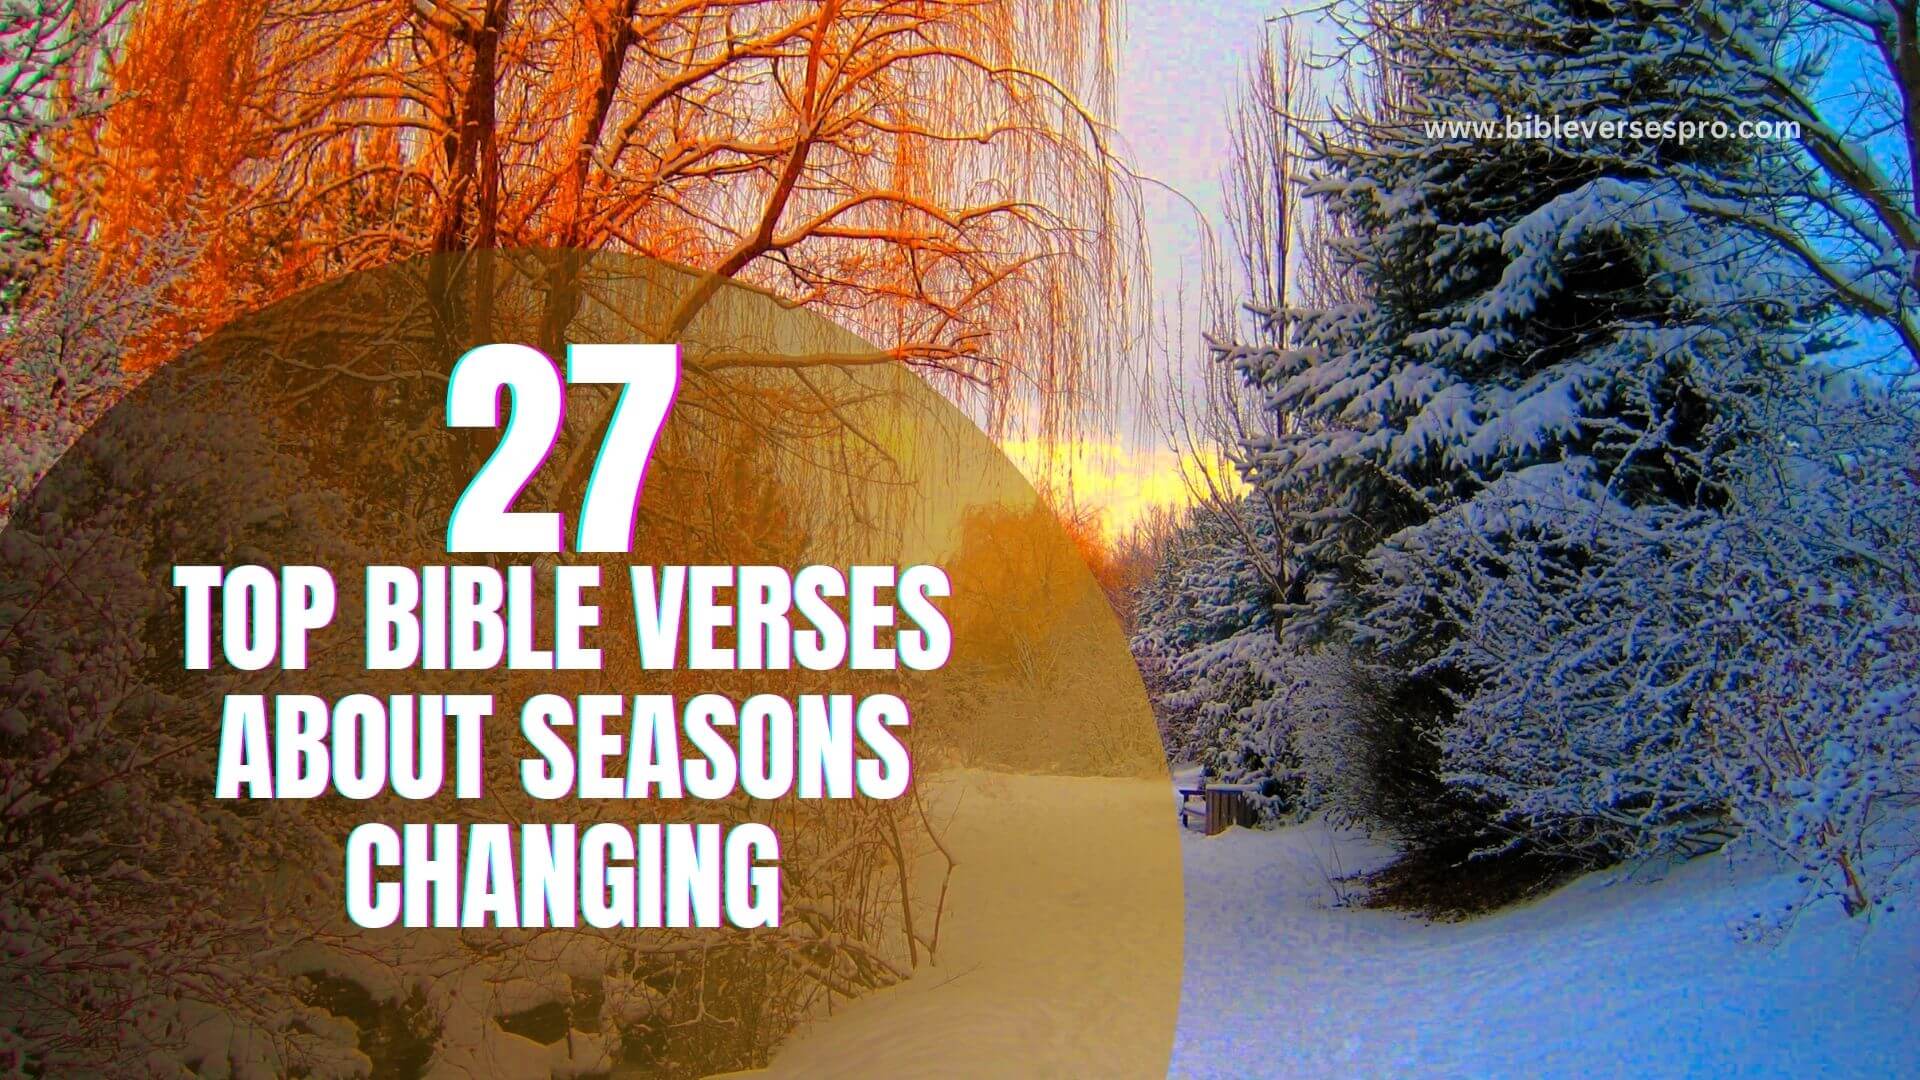 TOP BIBLE VERSES ABOUT SEASONS CHANGING (1)